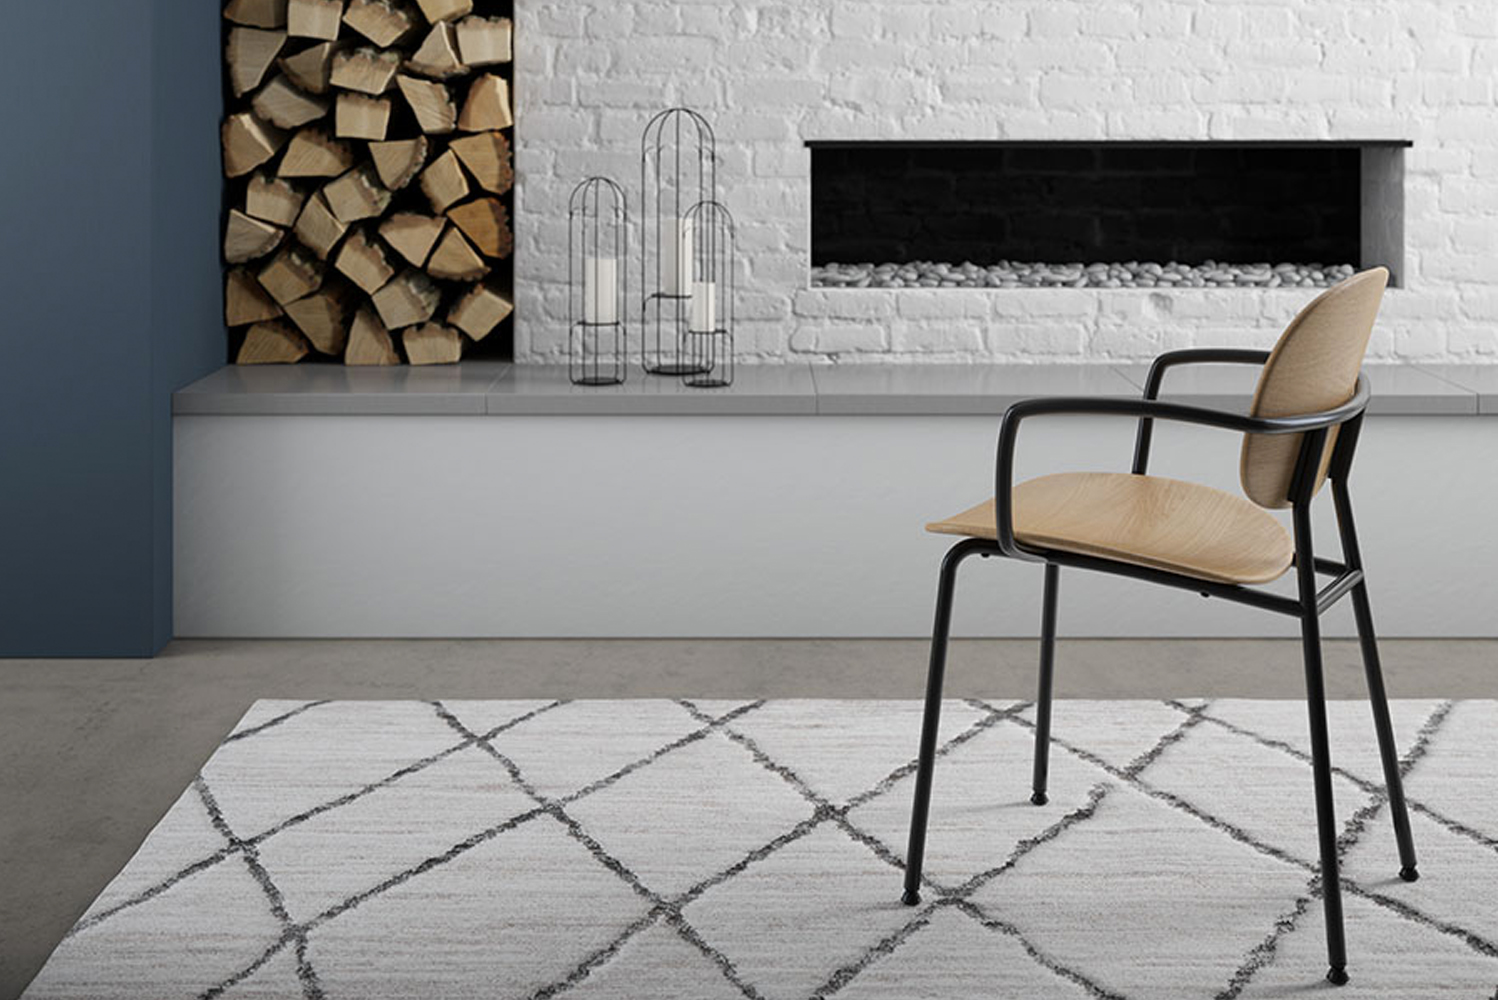 Community Furniture launched the Bryn seating collection